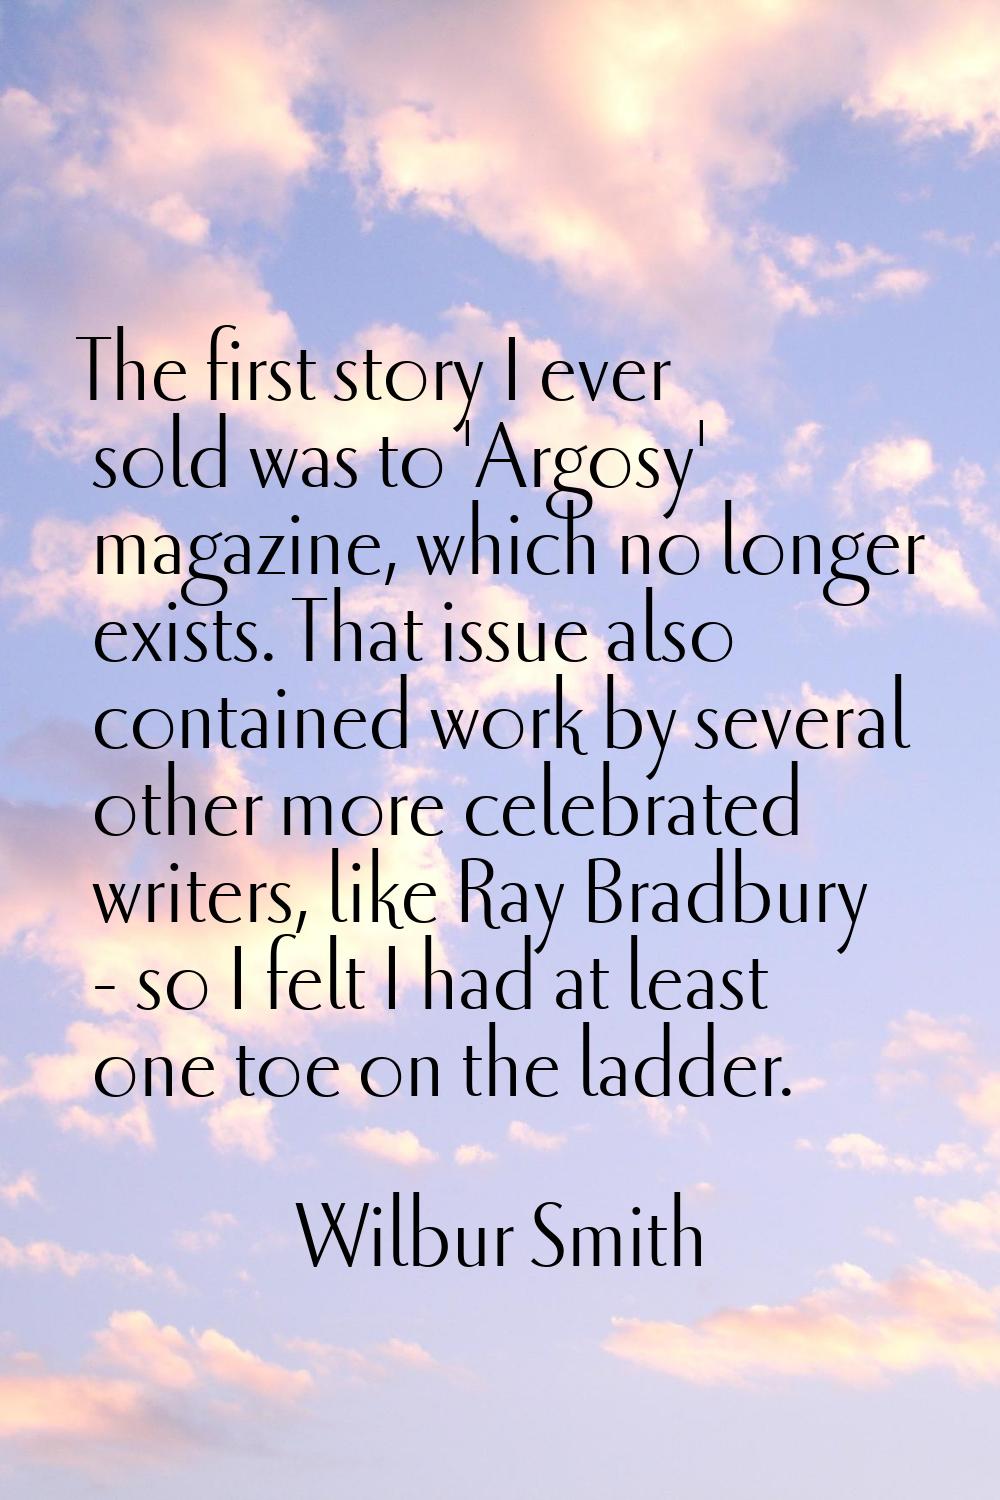 The first story I ever sold was to 'Argosy' magazine, which no longer exists. That issue also conta